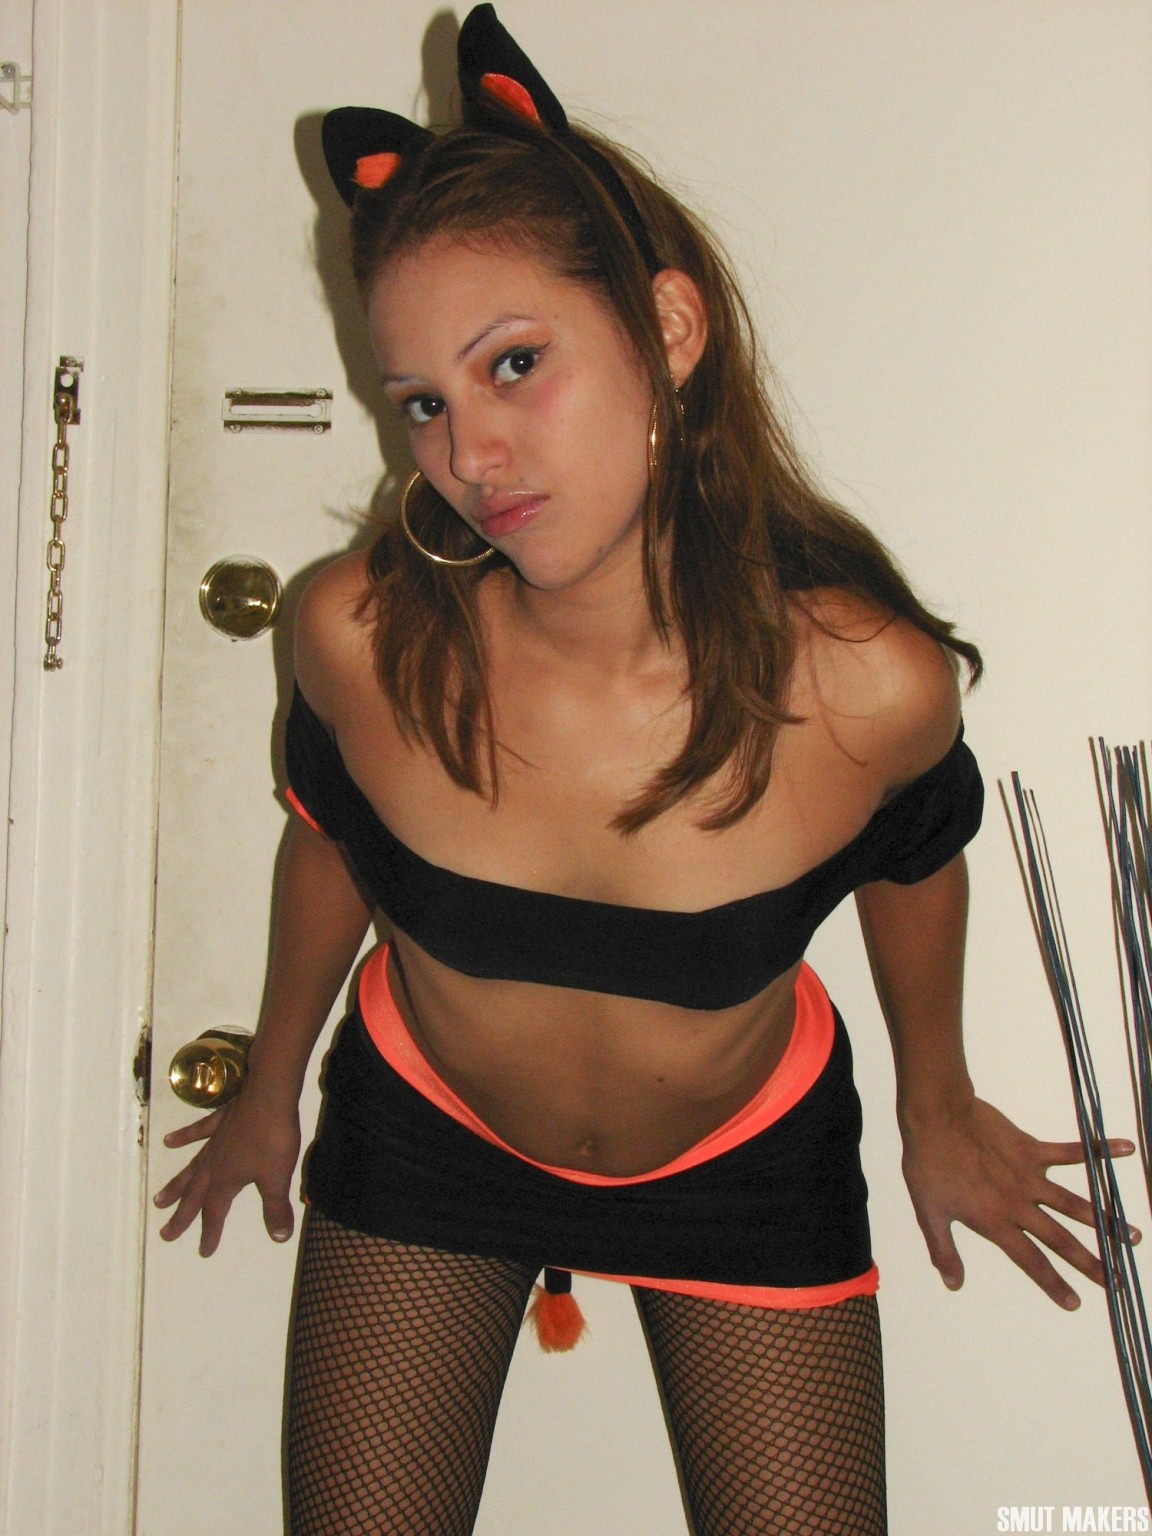 Latina teen is ready for Halloween in her cute Kitty costume #67947522